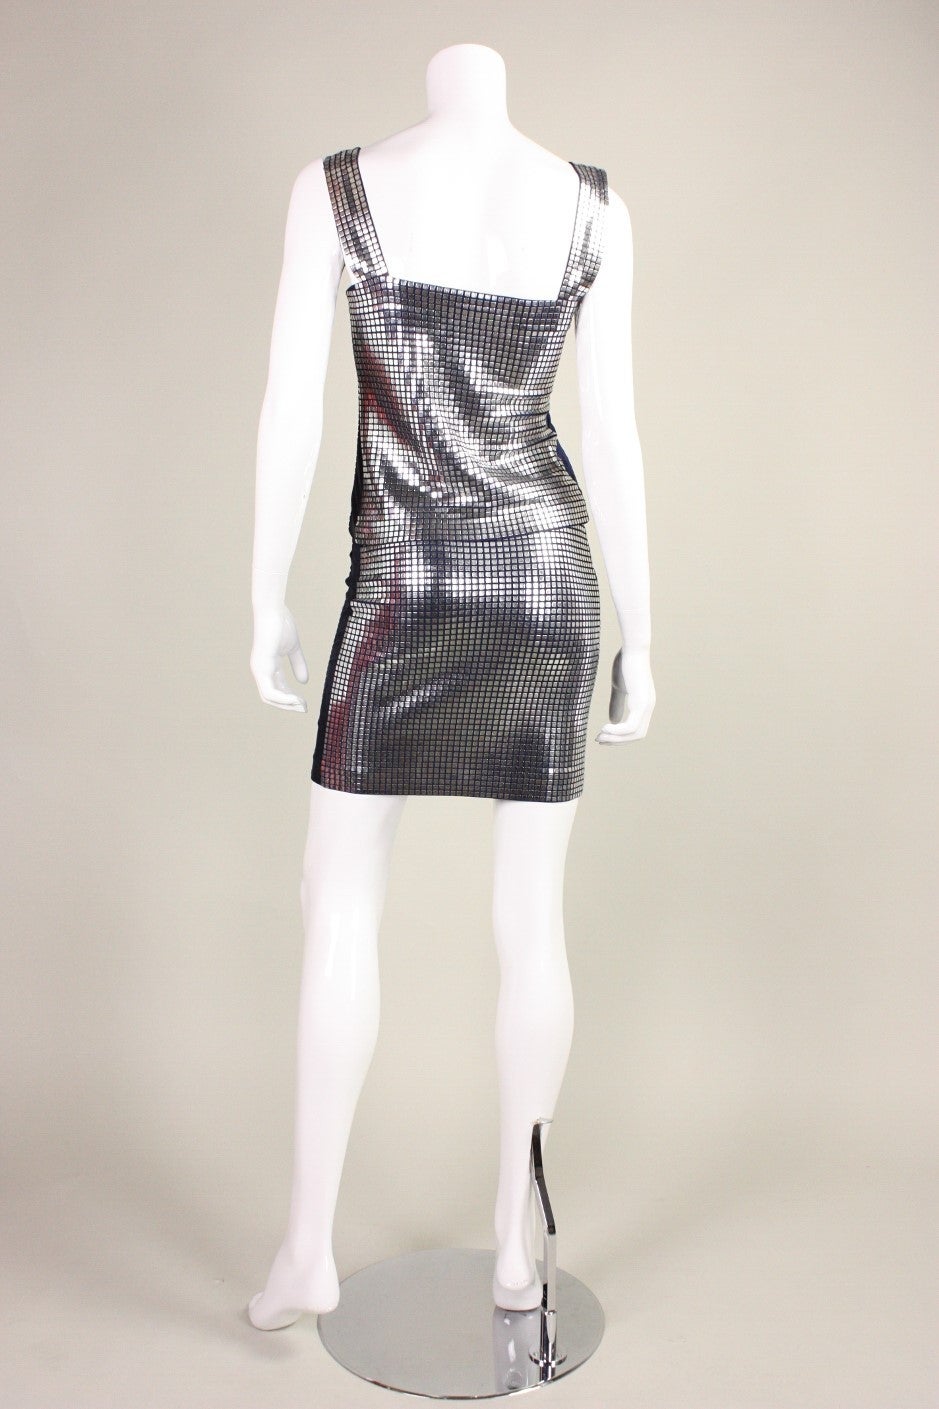 Vintage ensemble from Paco Rabanne dates to the late 1980's.  It is made of a navy cotton/elastic blend that is almost entirely covered with small flat metal squares.  Tank and skirt both have side zip closures.  Lined.

Please note that in some